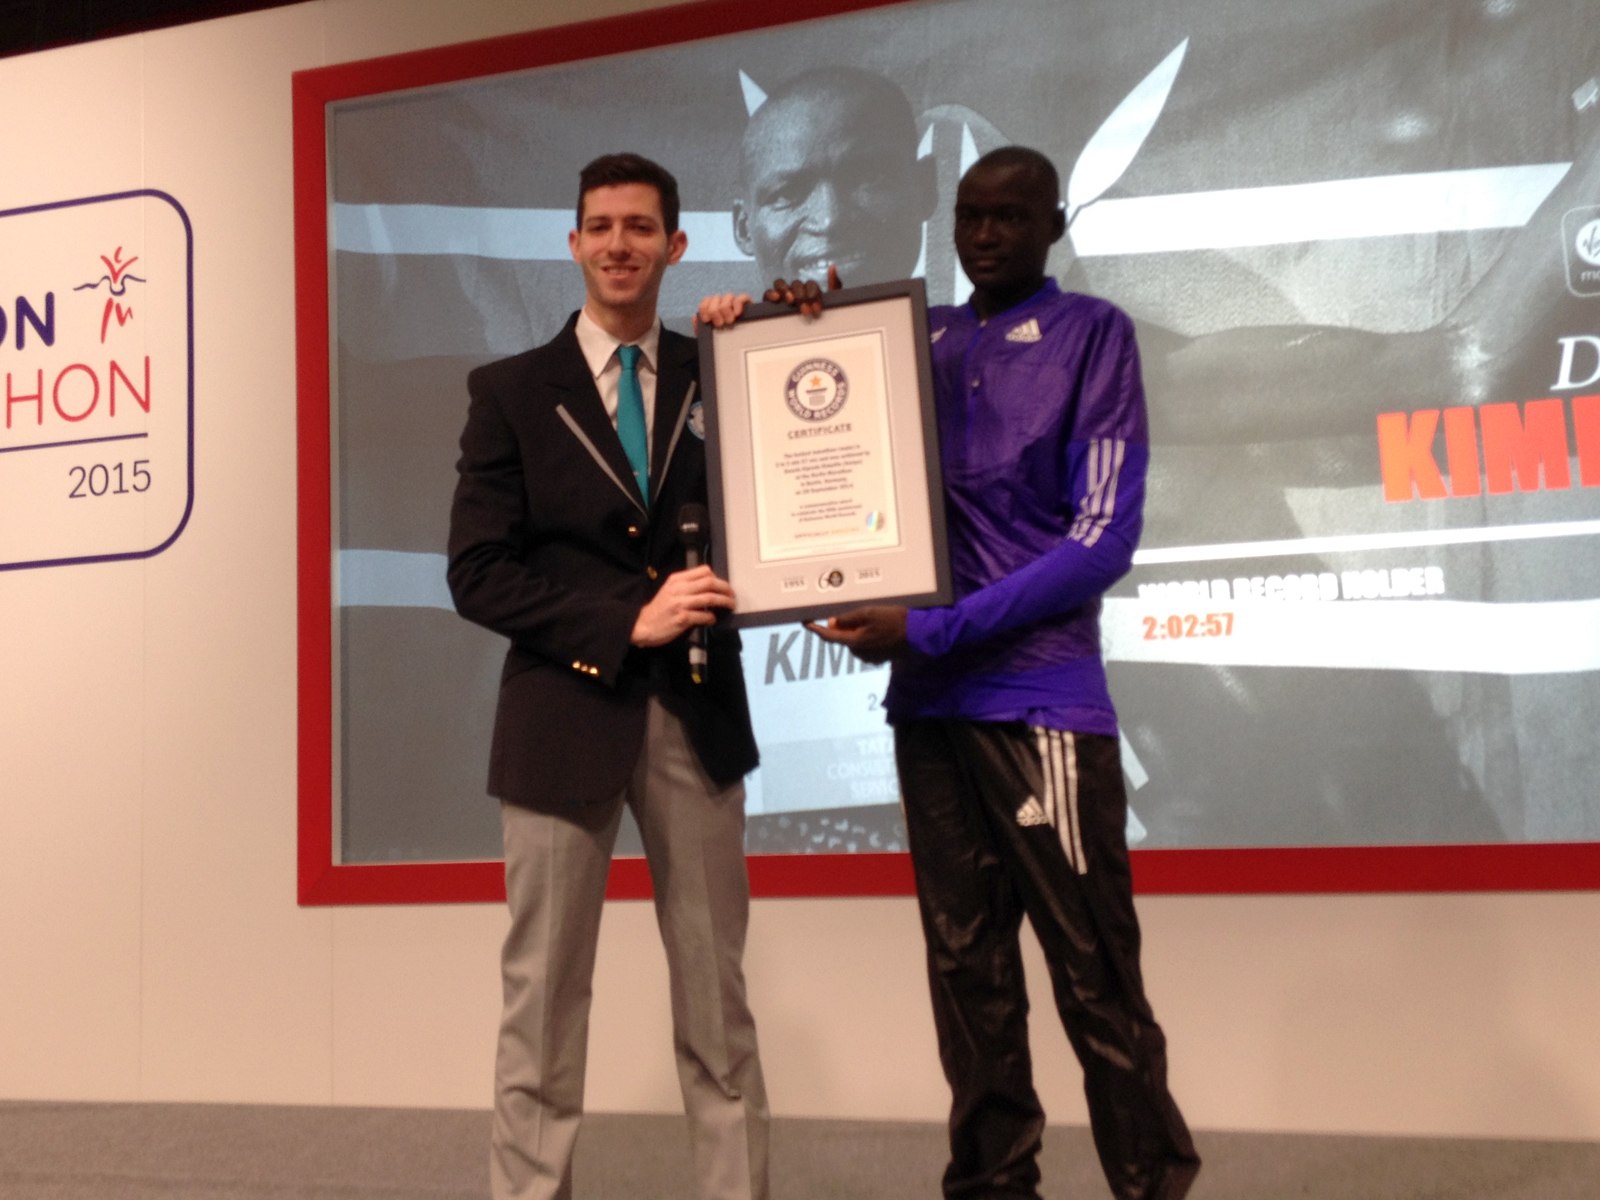 Dennis Kimetto presented with the official Guinness World Records certificate in London on Friday April 24, 2015 / Photo Credit: Yomi Omogbeja - AthleticsAfrica.Com